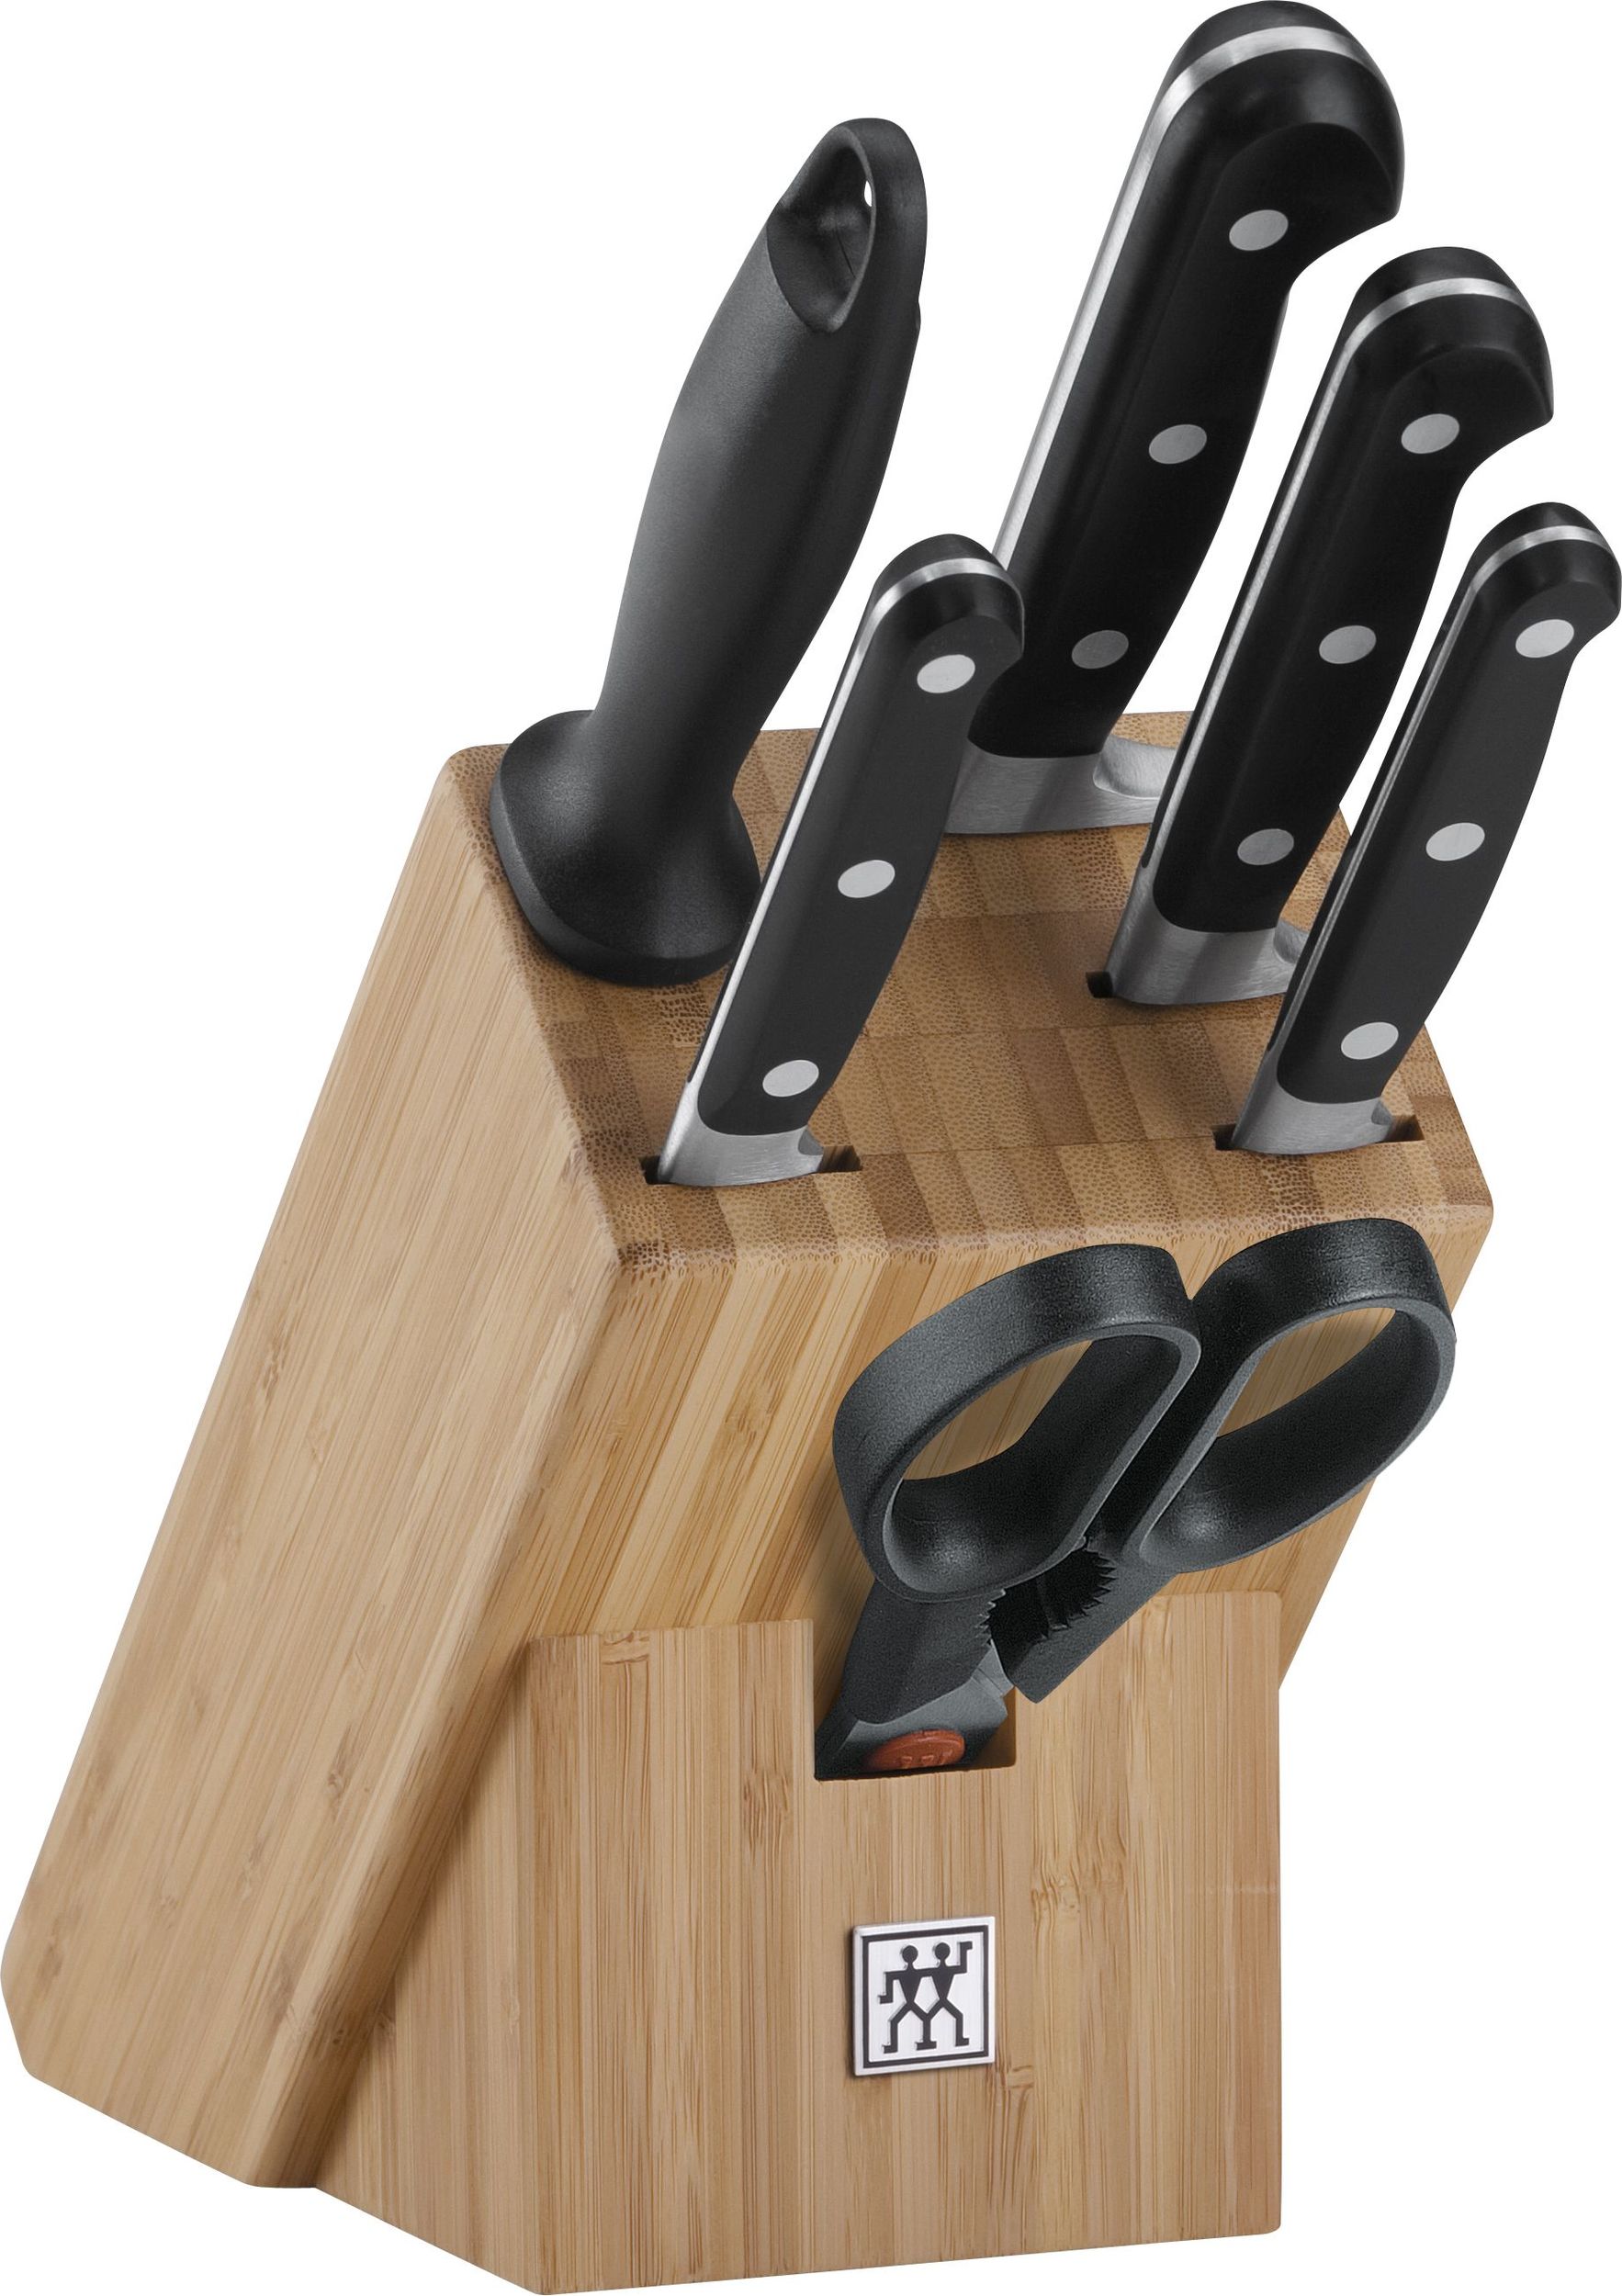 Zwilling Twin Chef Knife block with five knives with sharpener and scissors